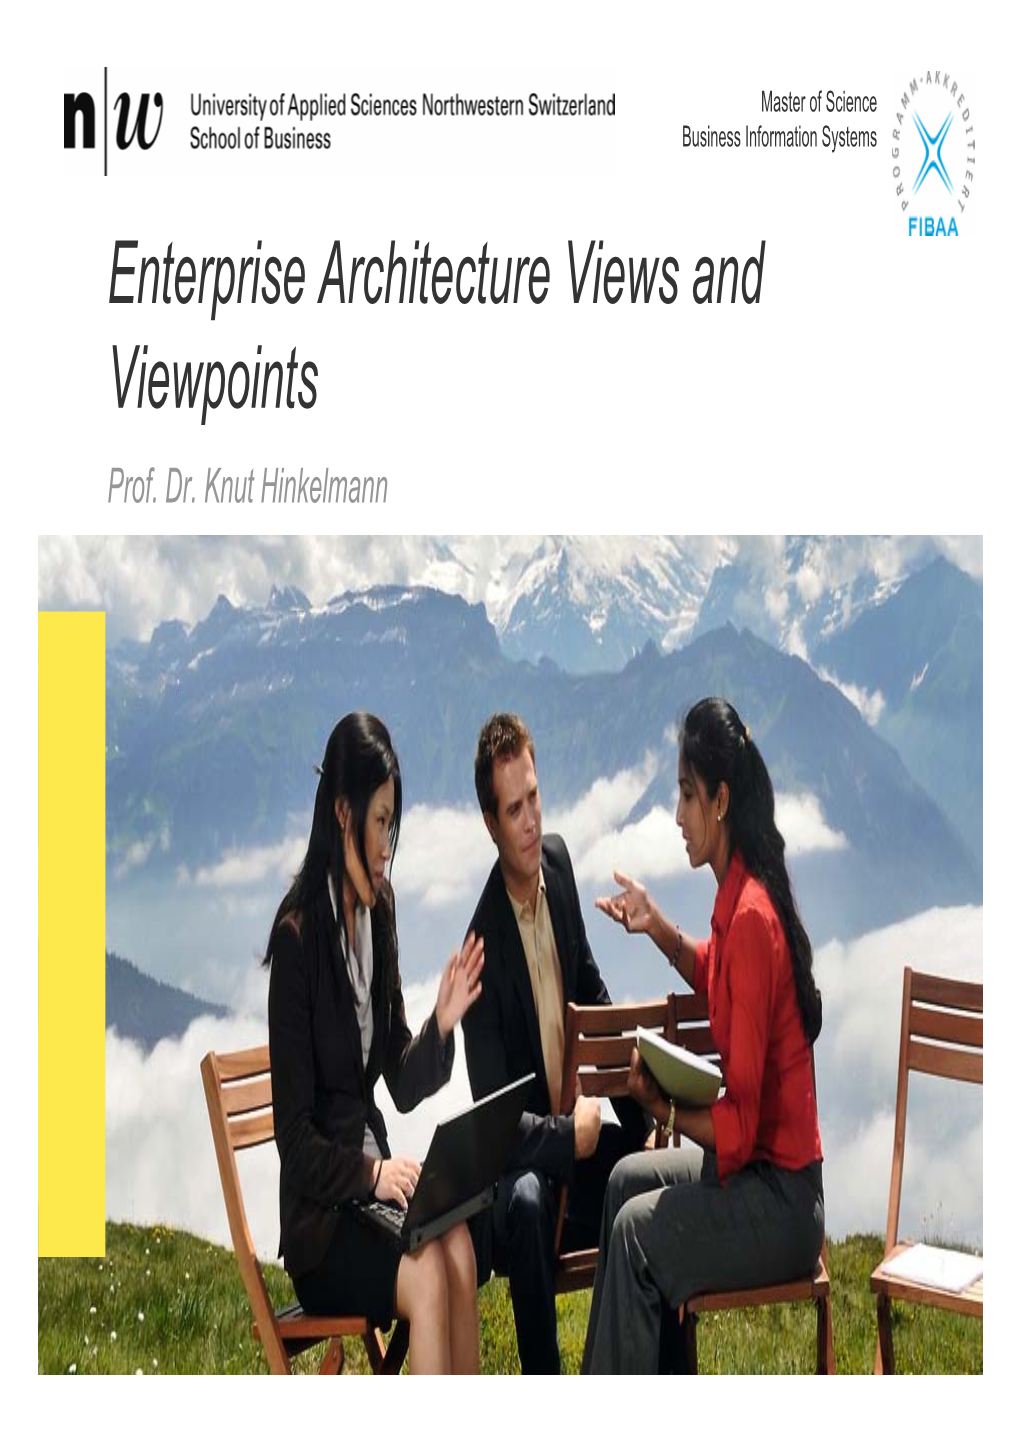 Enterprise Architecture Views and Viewpoints Prof